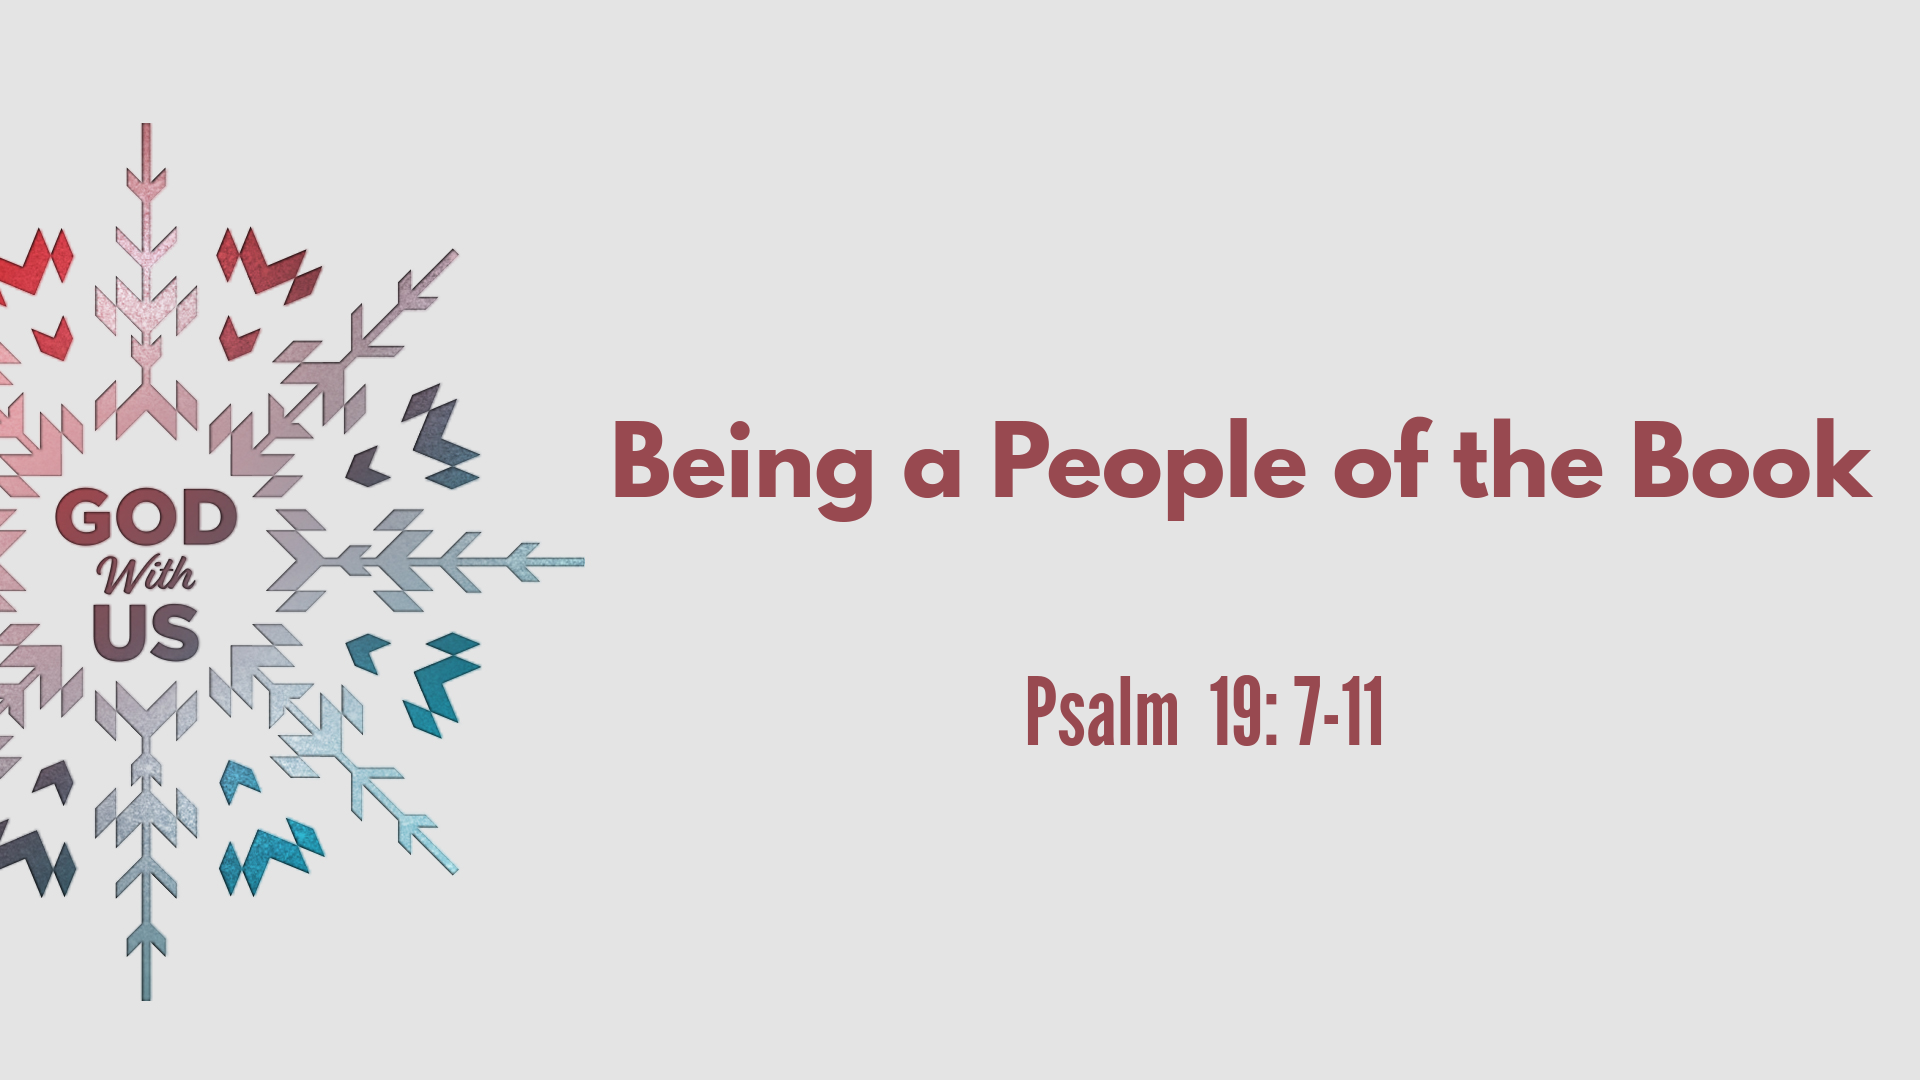 Jan 02, 2022 - Sermon Video Title: “Being a People of the Book”  Psalm 19: 7-11 Speaker:  Rev. Bill Wong